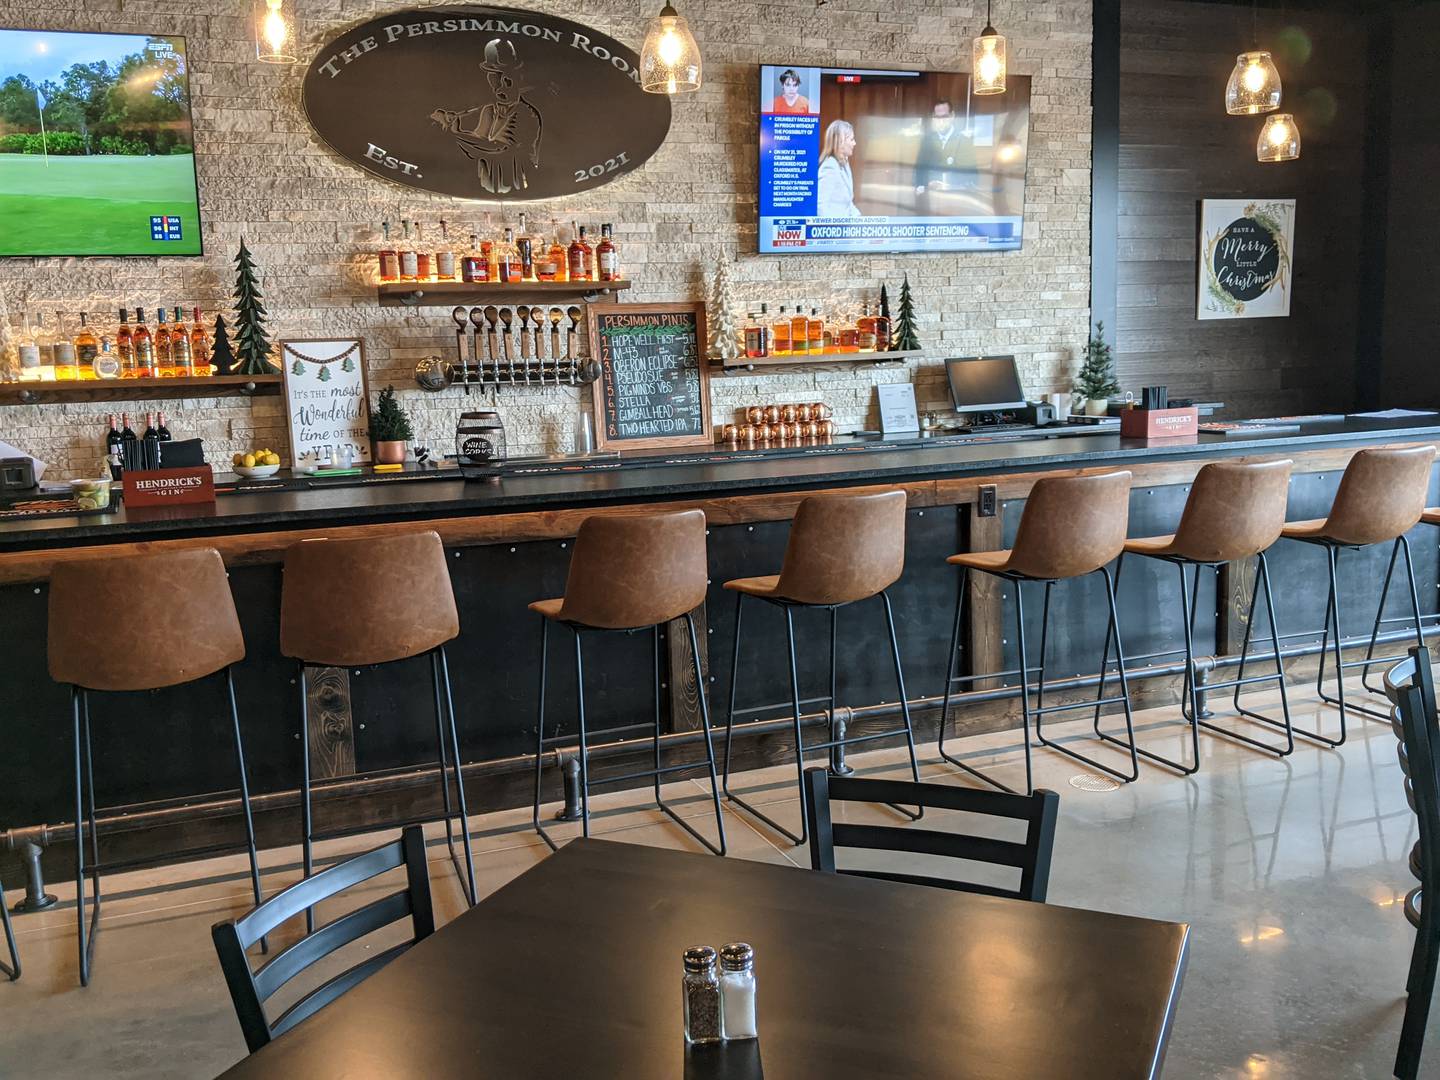 Along with featuring golf year-round, Whitetail Ridge Golf Dome also has a restaurant, The Persimmon Room, which is also the name of the restaurant at Whitetail Ridge Golf Club. The restaurant serves fast casual food.